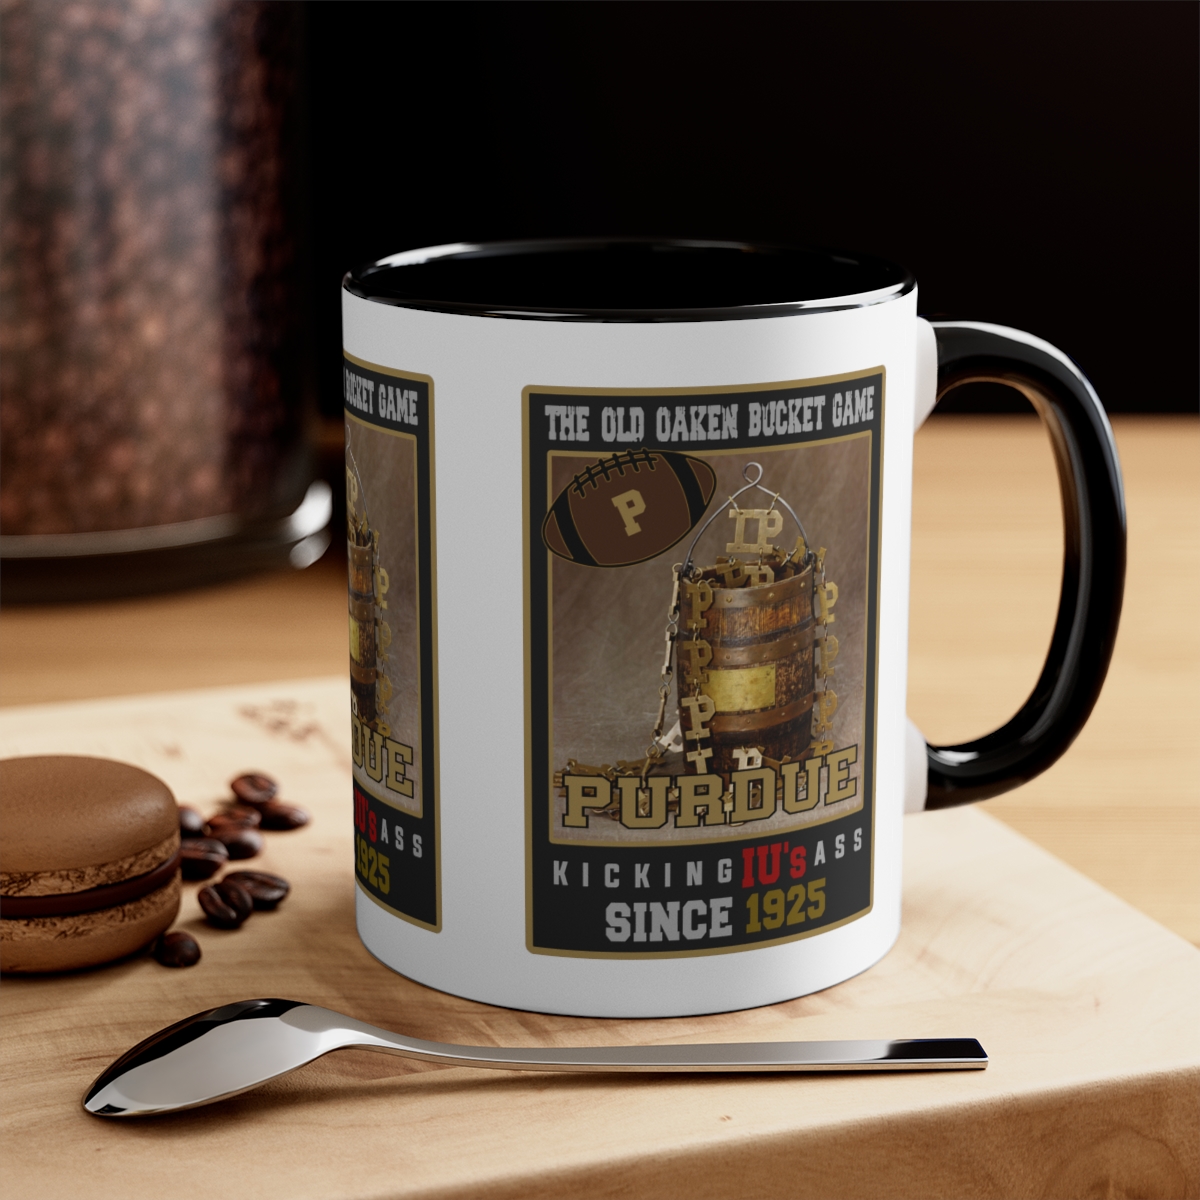 Purdue Hates IU .... The Old Oaken Bucket Game Kicking IU's Ass Since 1925 Accent Coffee Mug, 11oz product thumbnail image